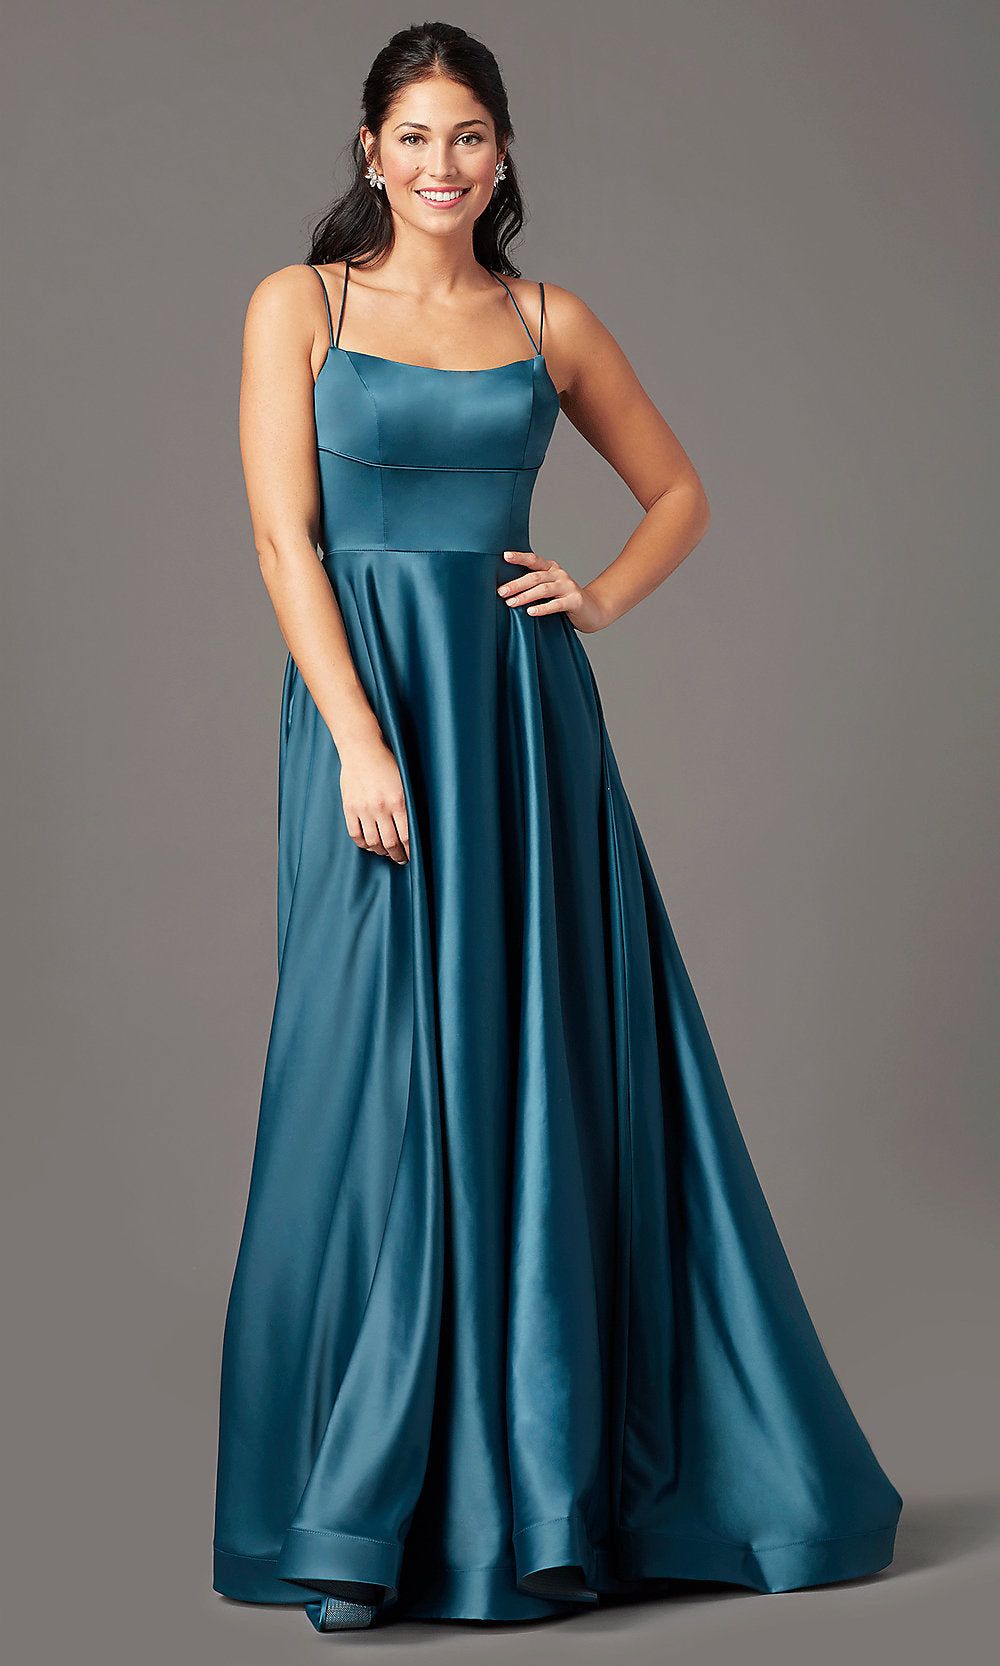 Square-Neck Long Formal Prom Dress by PromGirl